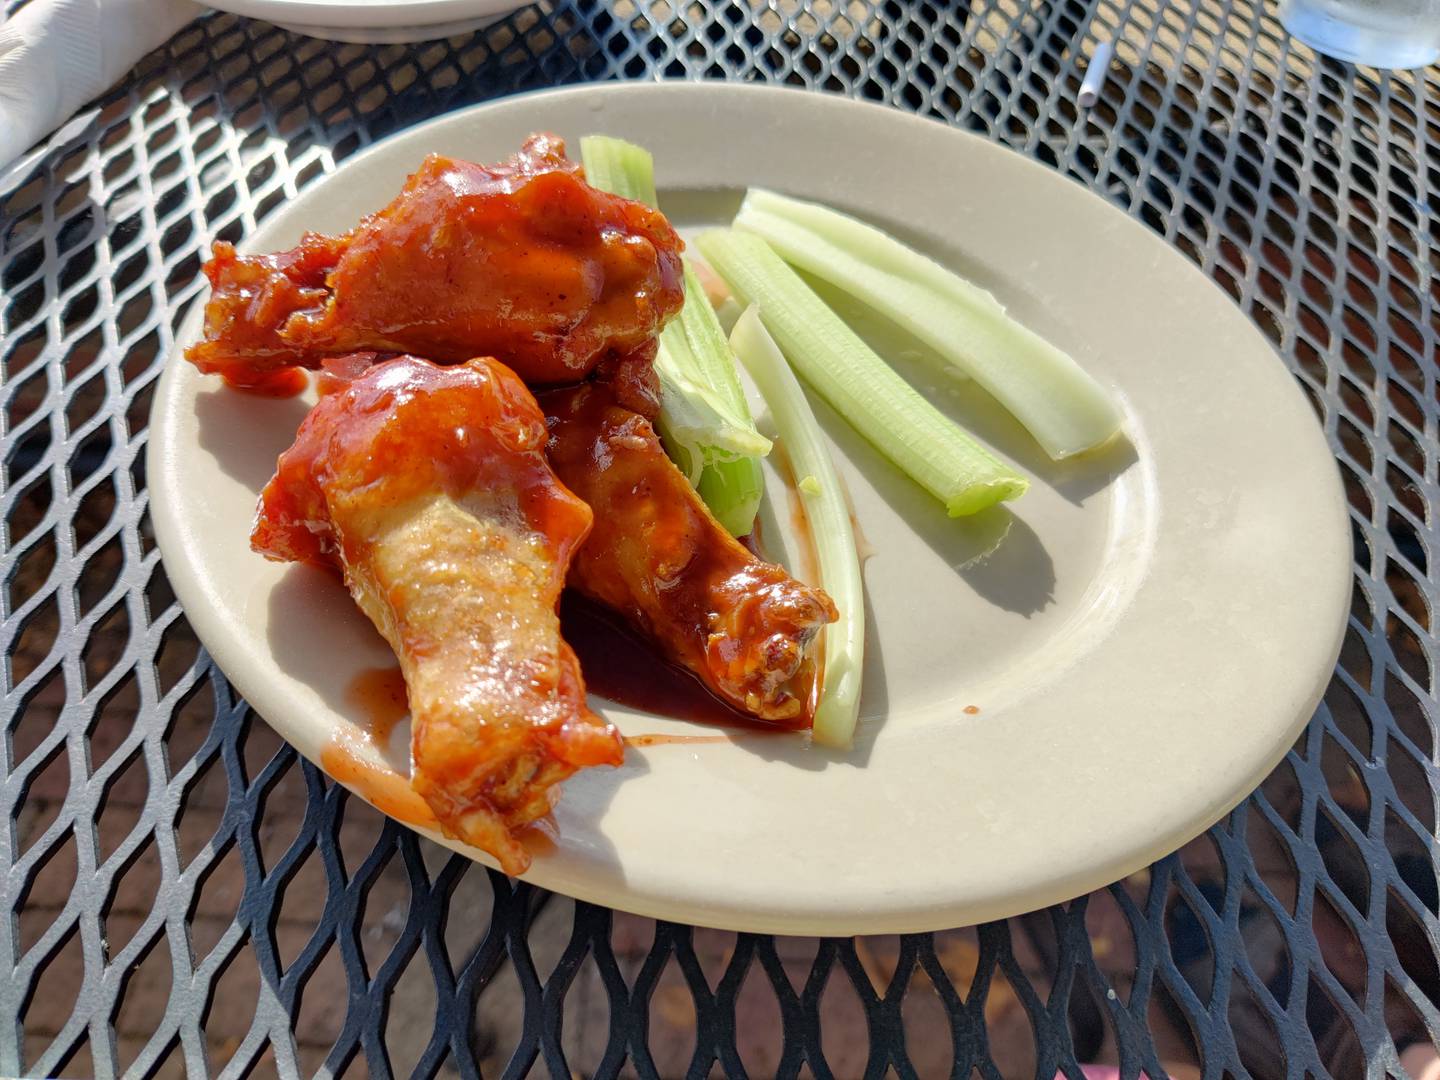 Wings with honey barbecue sauce at Pal Joey's in downtown Batavia.